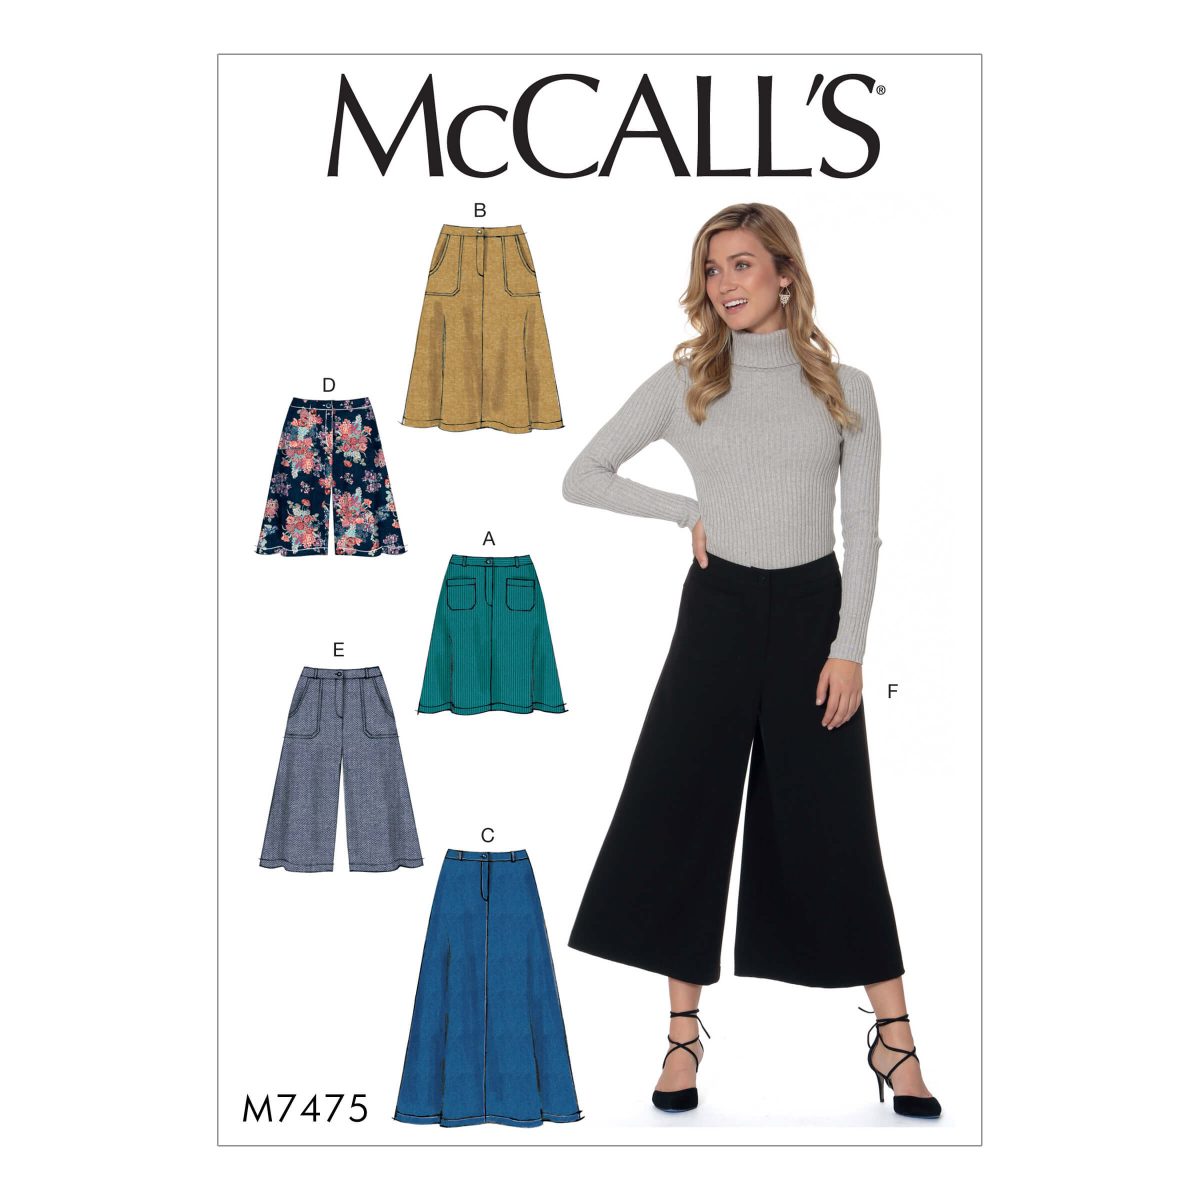 McCall's Sewing Pattern M7475 Misses' Flared Skirts, Shorts and Culottes